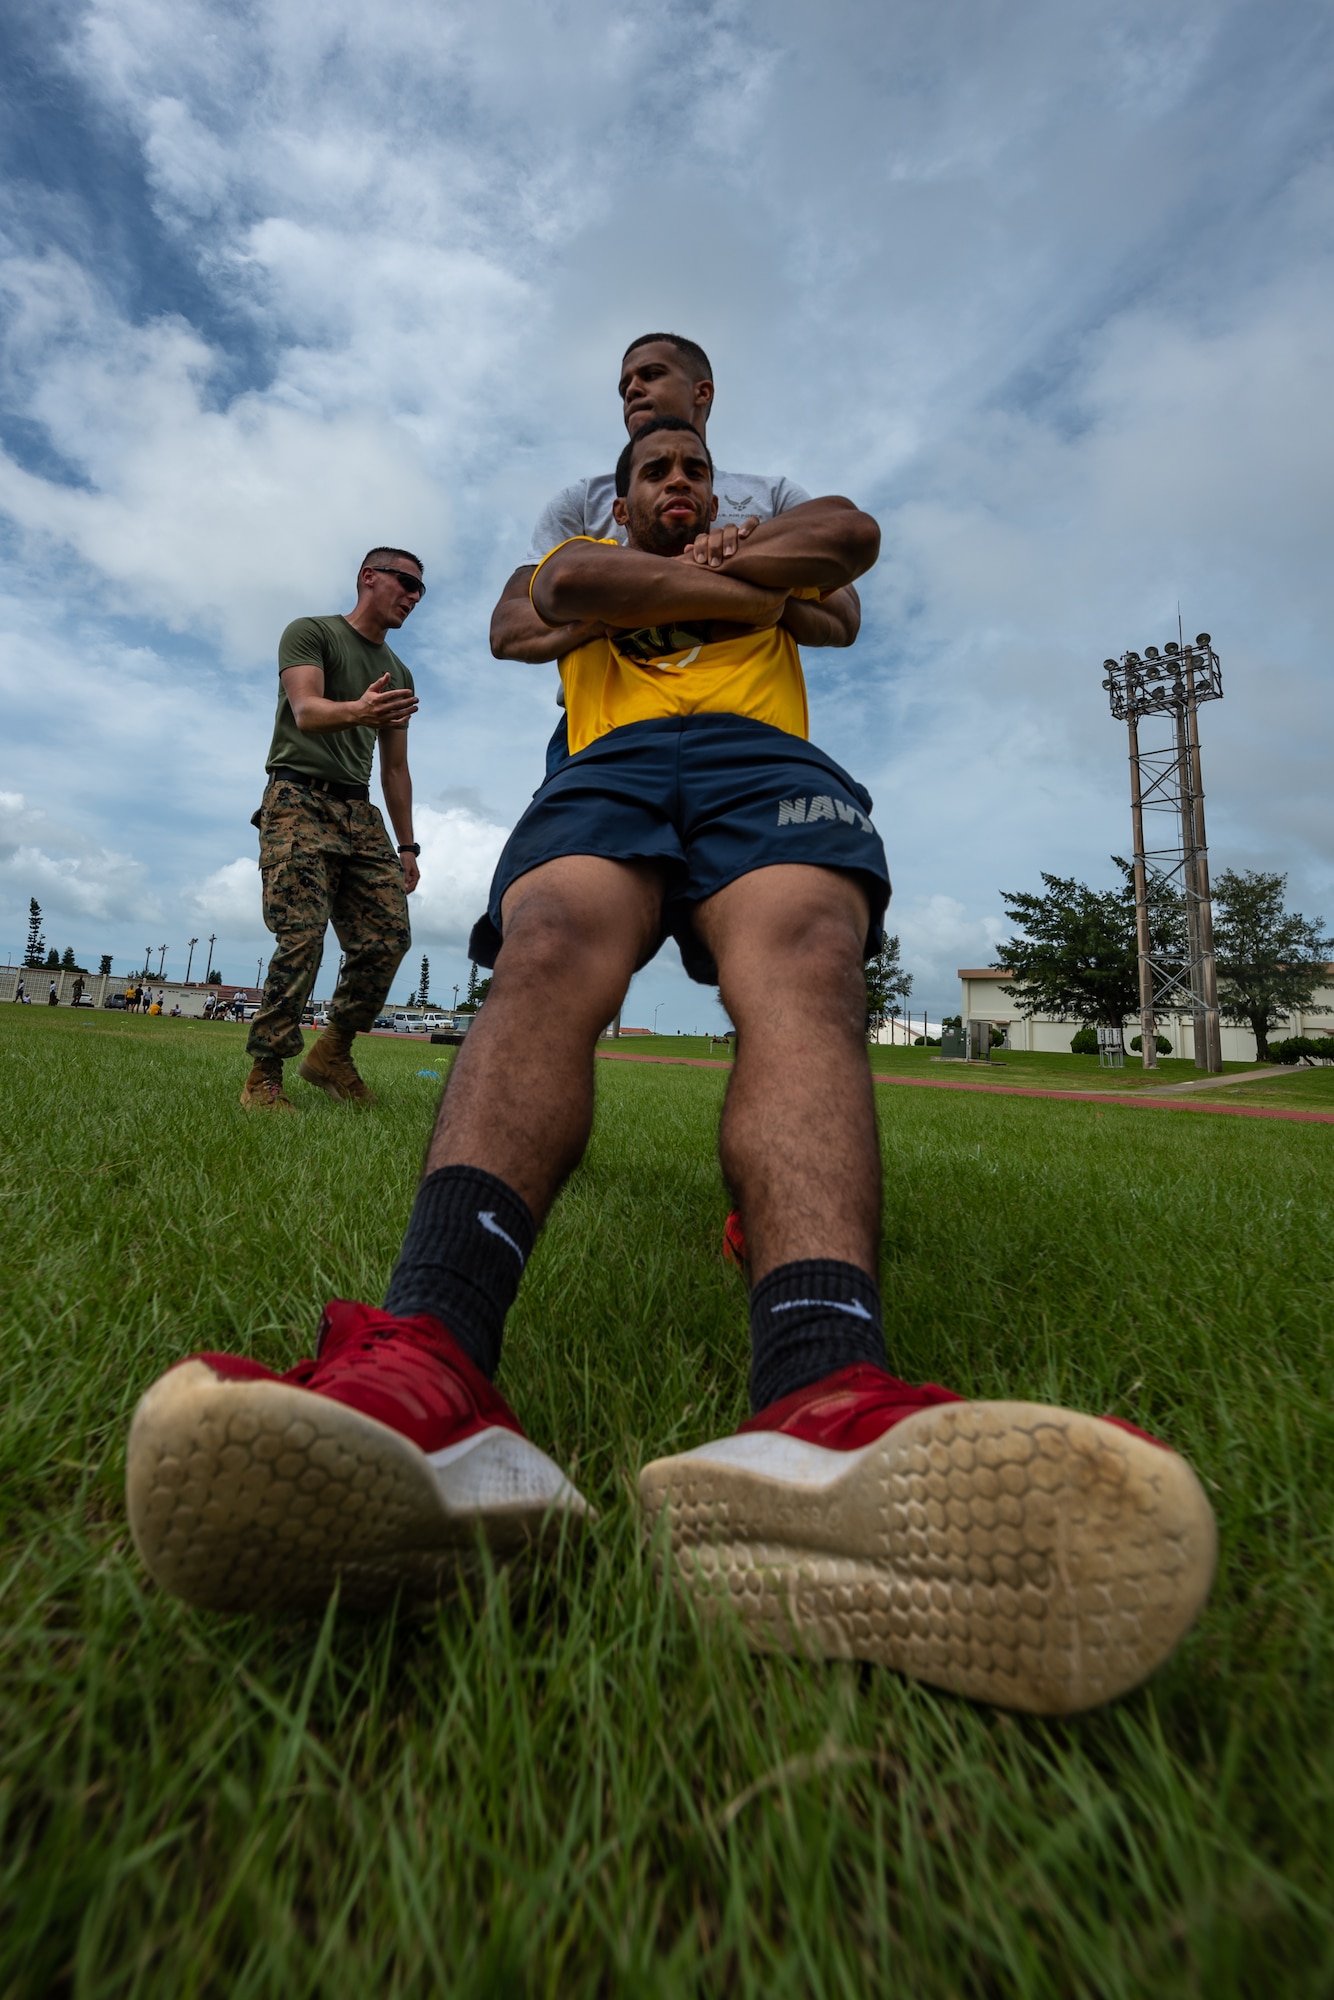 U.S. Air Force Staff Sgt. Thomas Nollie carries U.S. Navy Petty Officer 2nd Class Jesse Pedrero, both Okinawa Joint Experience Green Team students, during the Okinawa Joint Fitness Challenge Sept. 26, 2018, at Kadena Air Base, Japan. Service members from the Army, Navy, Air Force and Marine Corps were equally broken up into four classes to provide a joint learning environment. (U.S. Air Force photo by Staff Sgt. Micaiah Anthony)